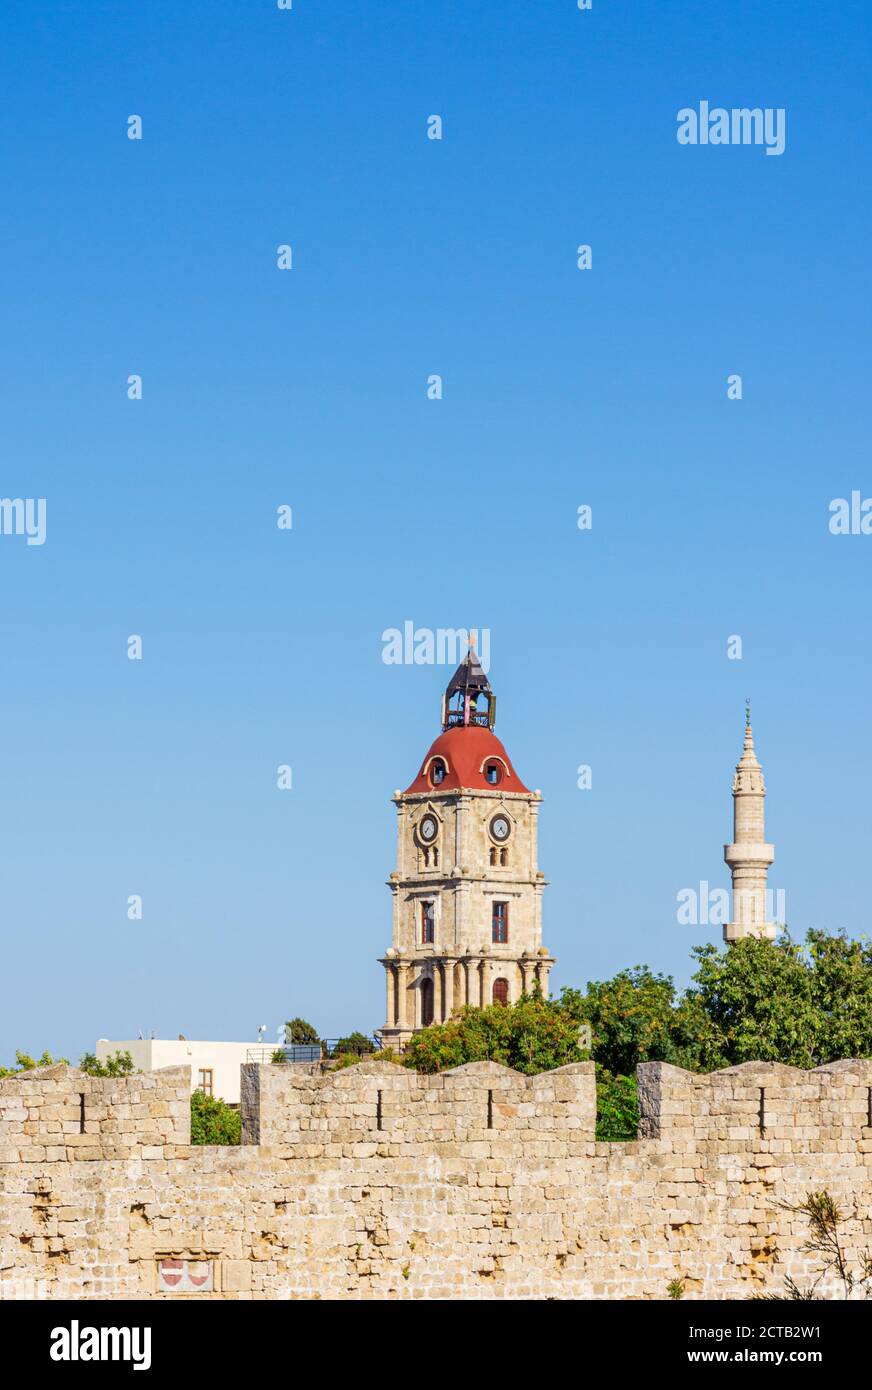 Medieval Clock Tower and Minaret of the Mosque of Suleiman in old Rhodes Town, Greece Stock Photo